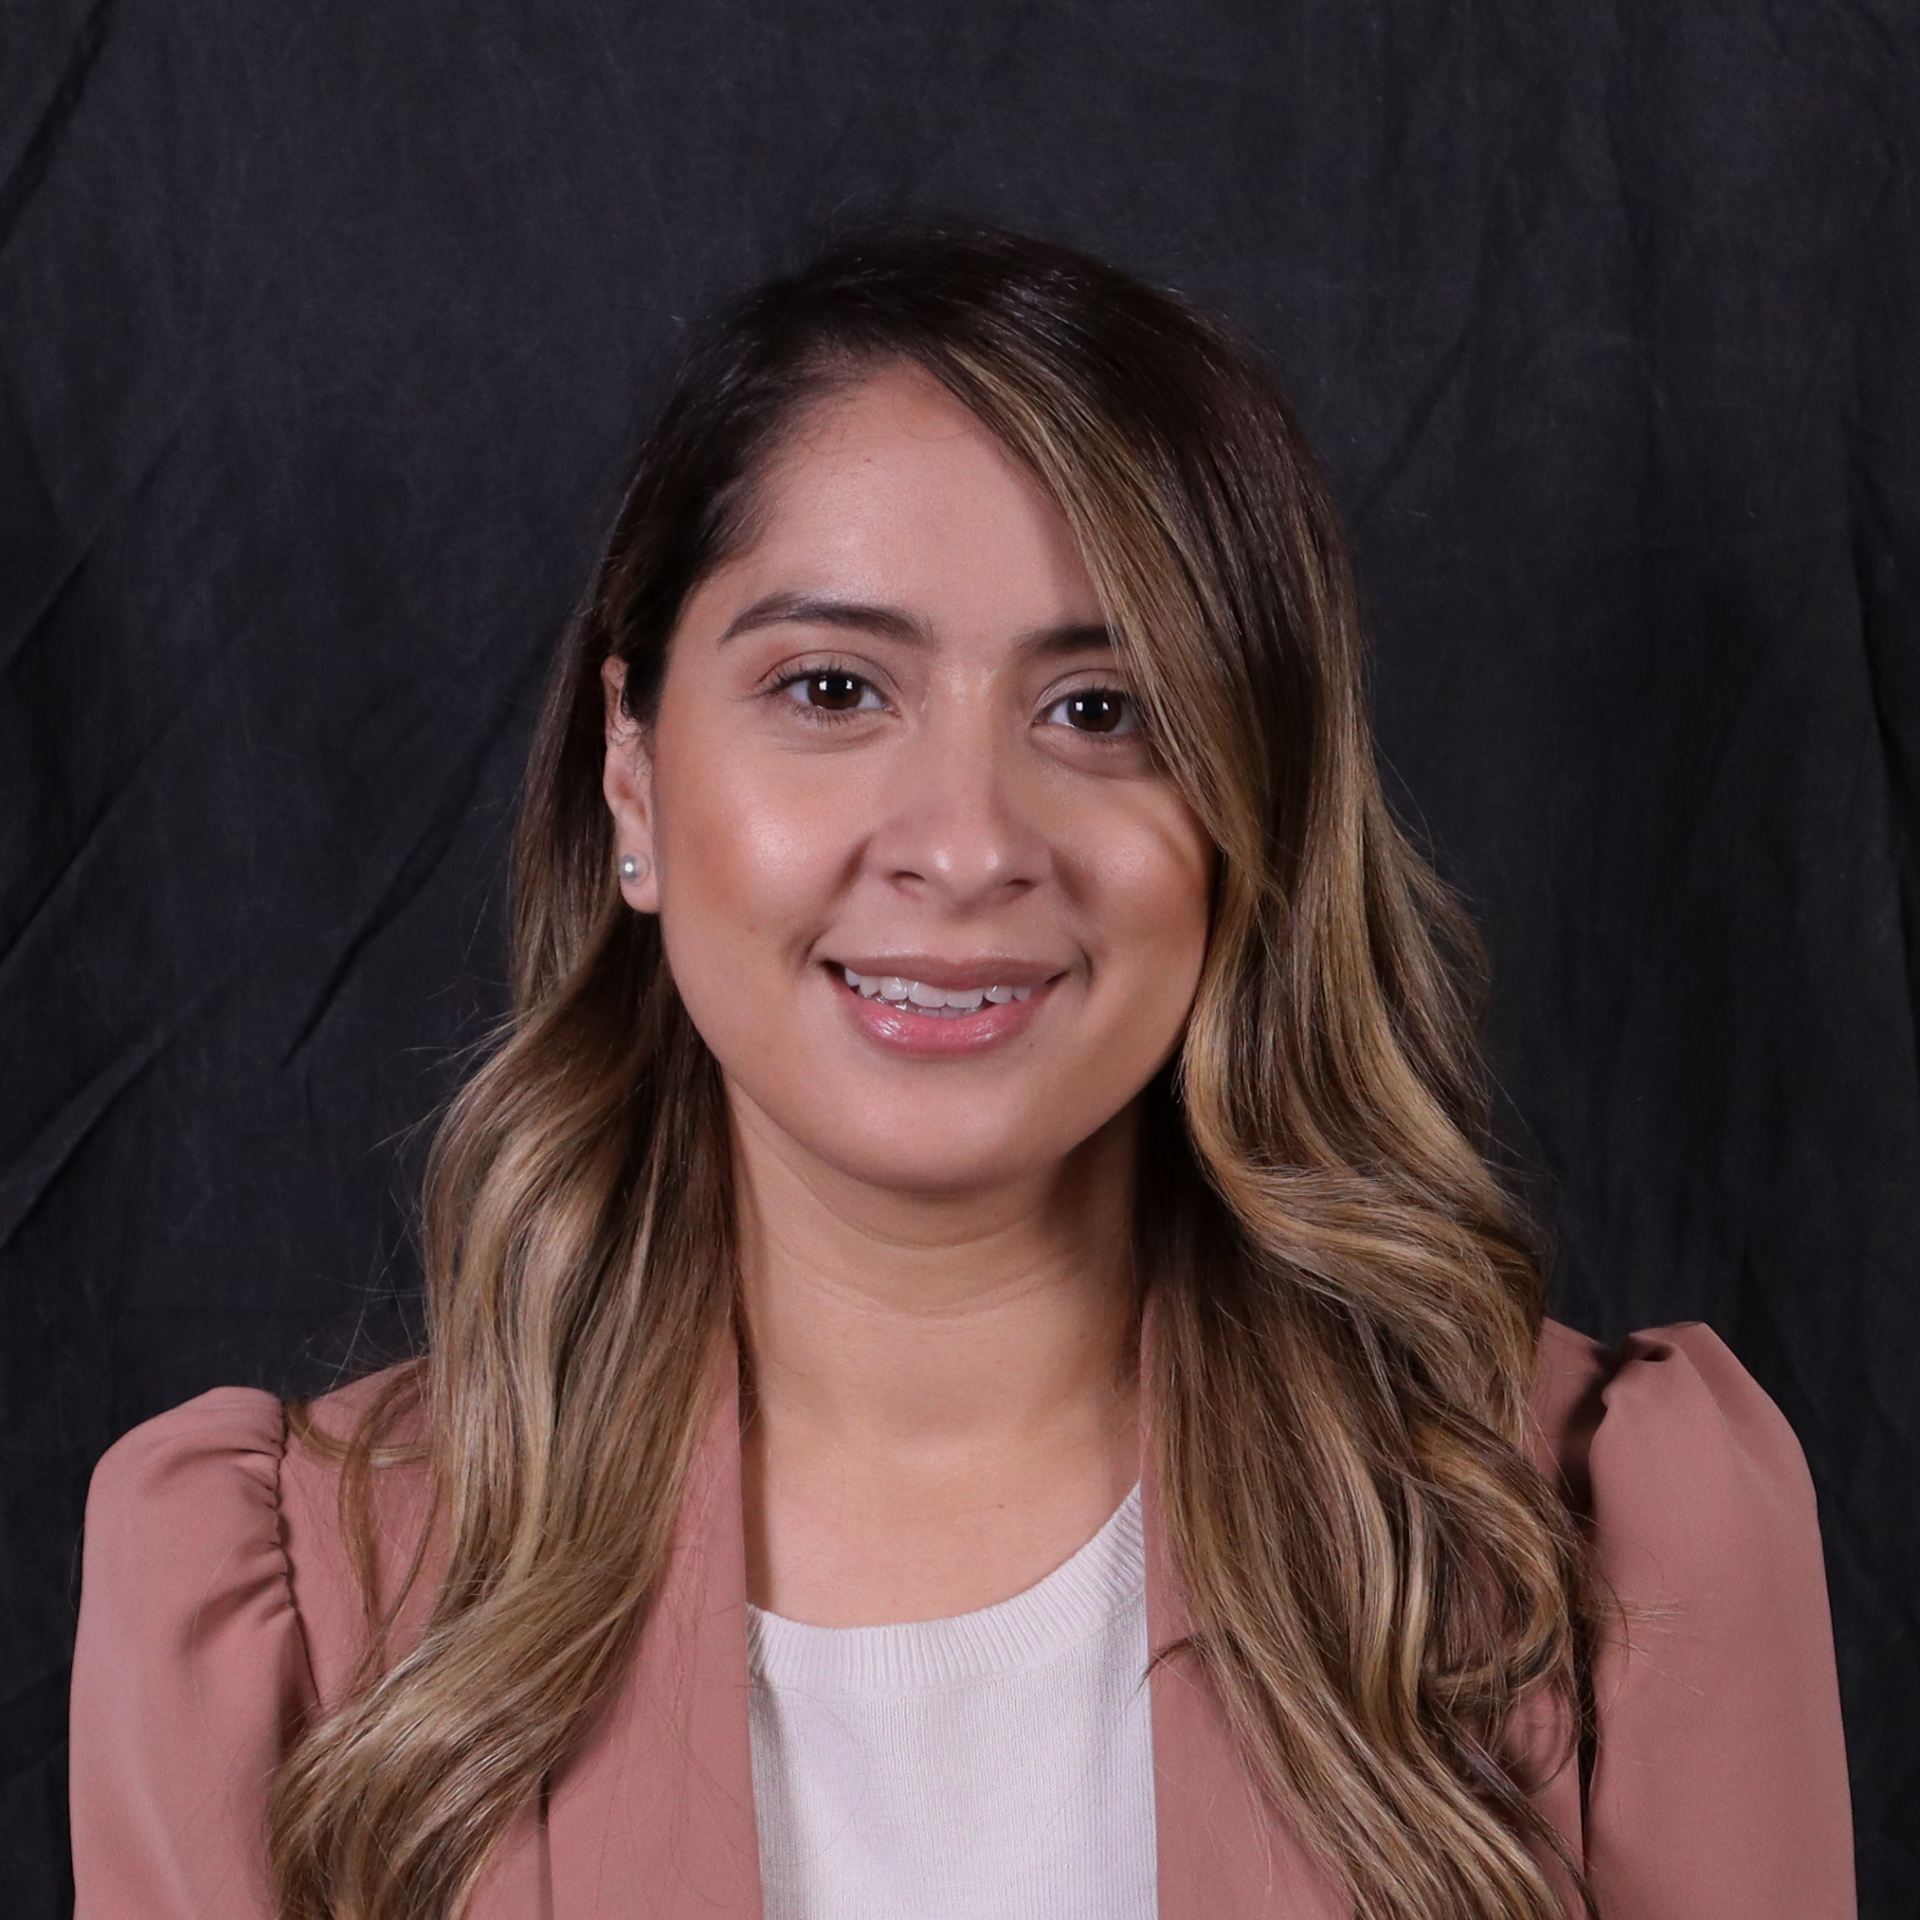 Headshot of Amy Aguirre with a business casual top against a dark background.